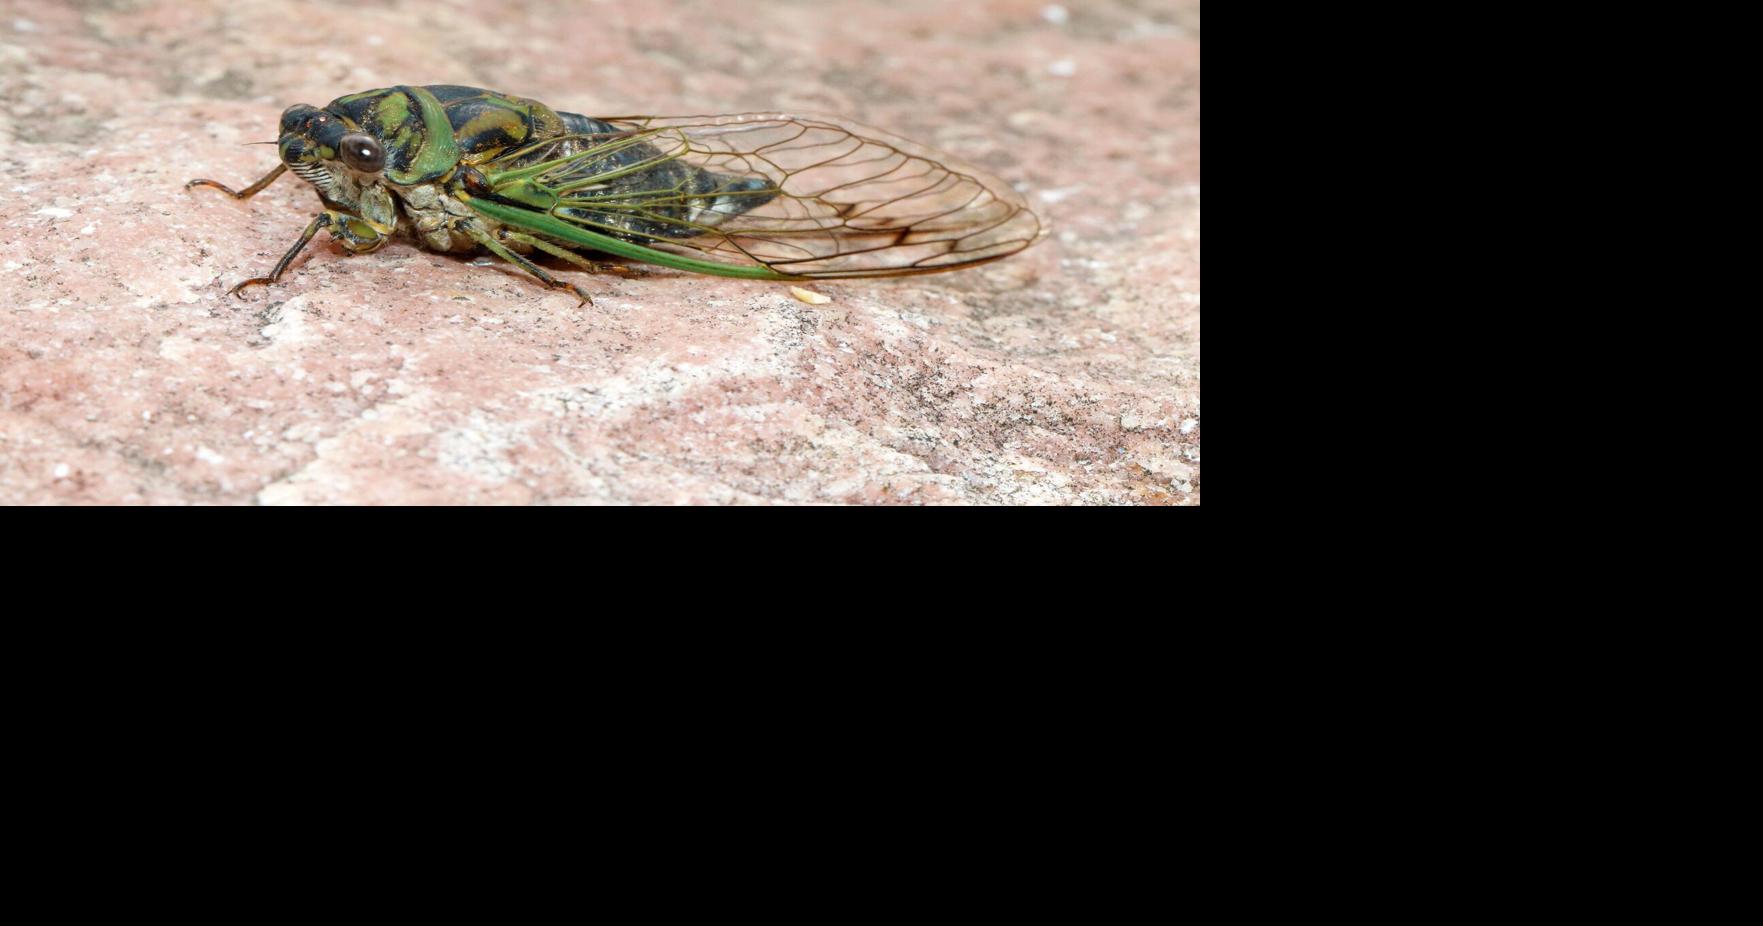 The cicadas are here in southern Wisconsin! (Just the normal ones, not